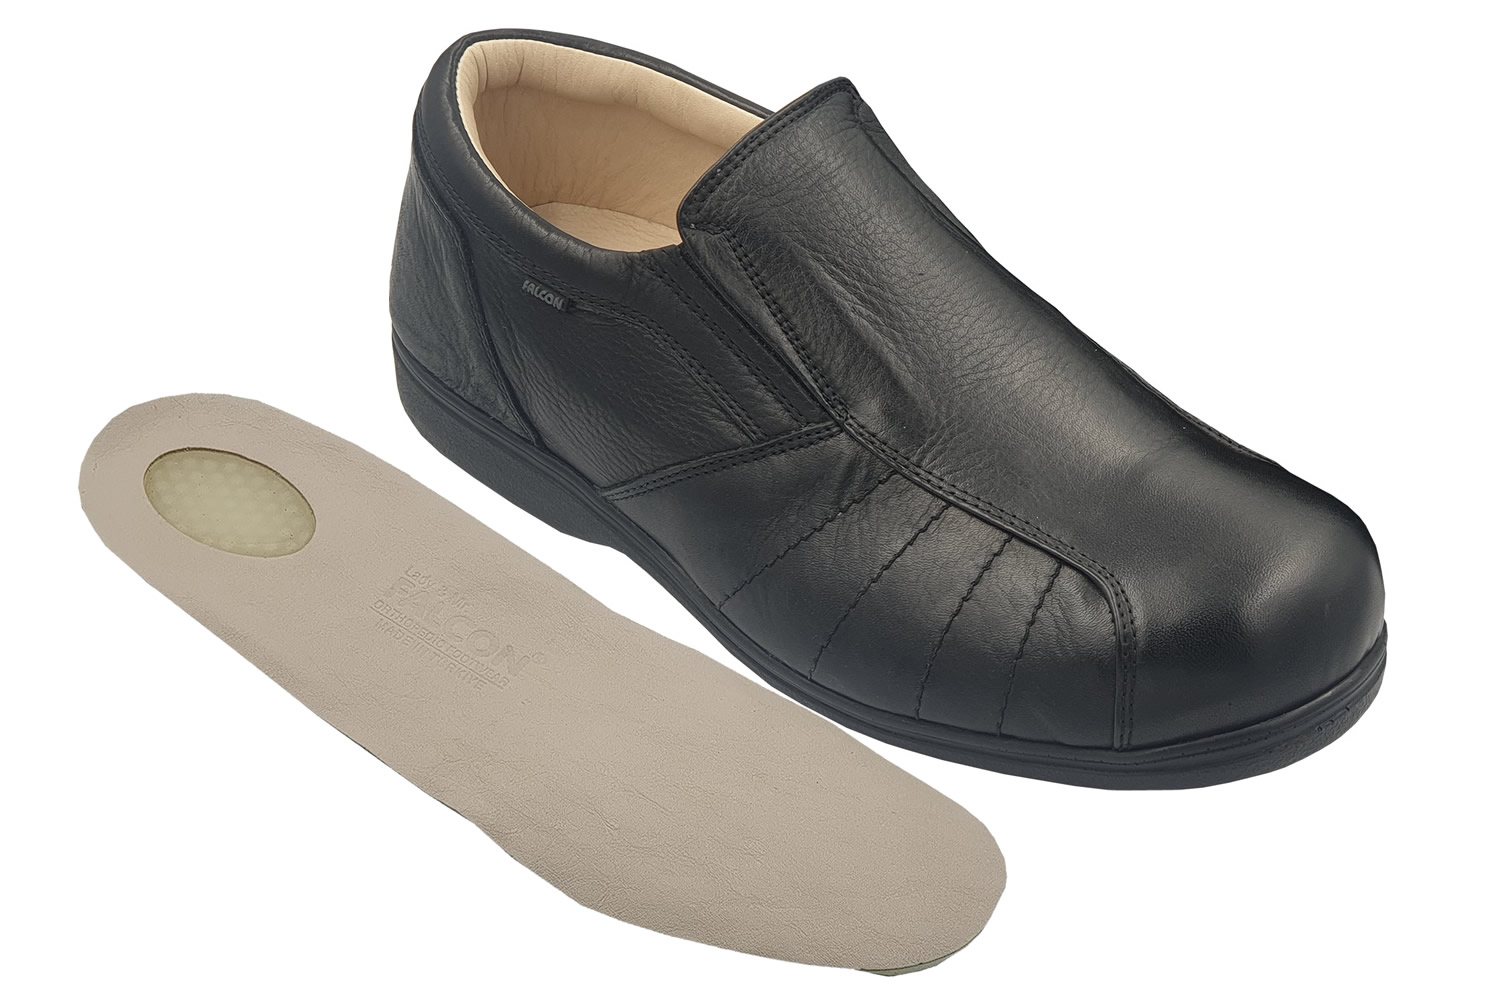 Heel Support Shoes for Pain Relief | Vionic UK